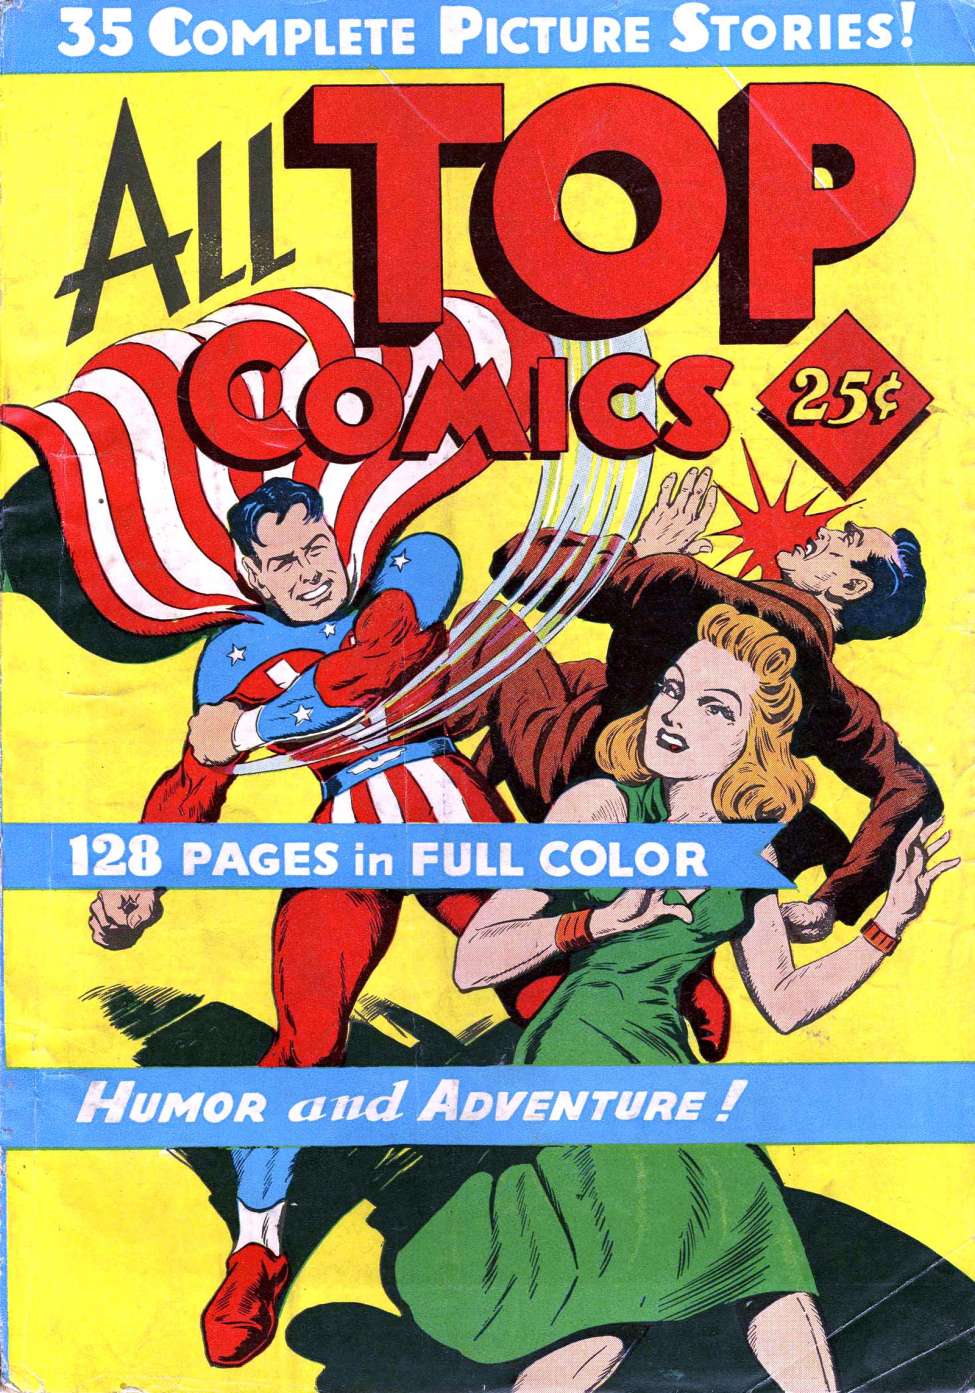 Book Cover For All Top Comics (1944)